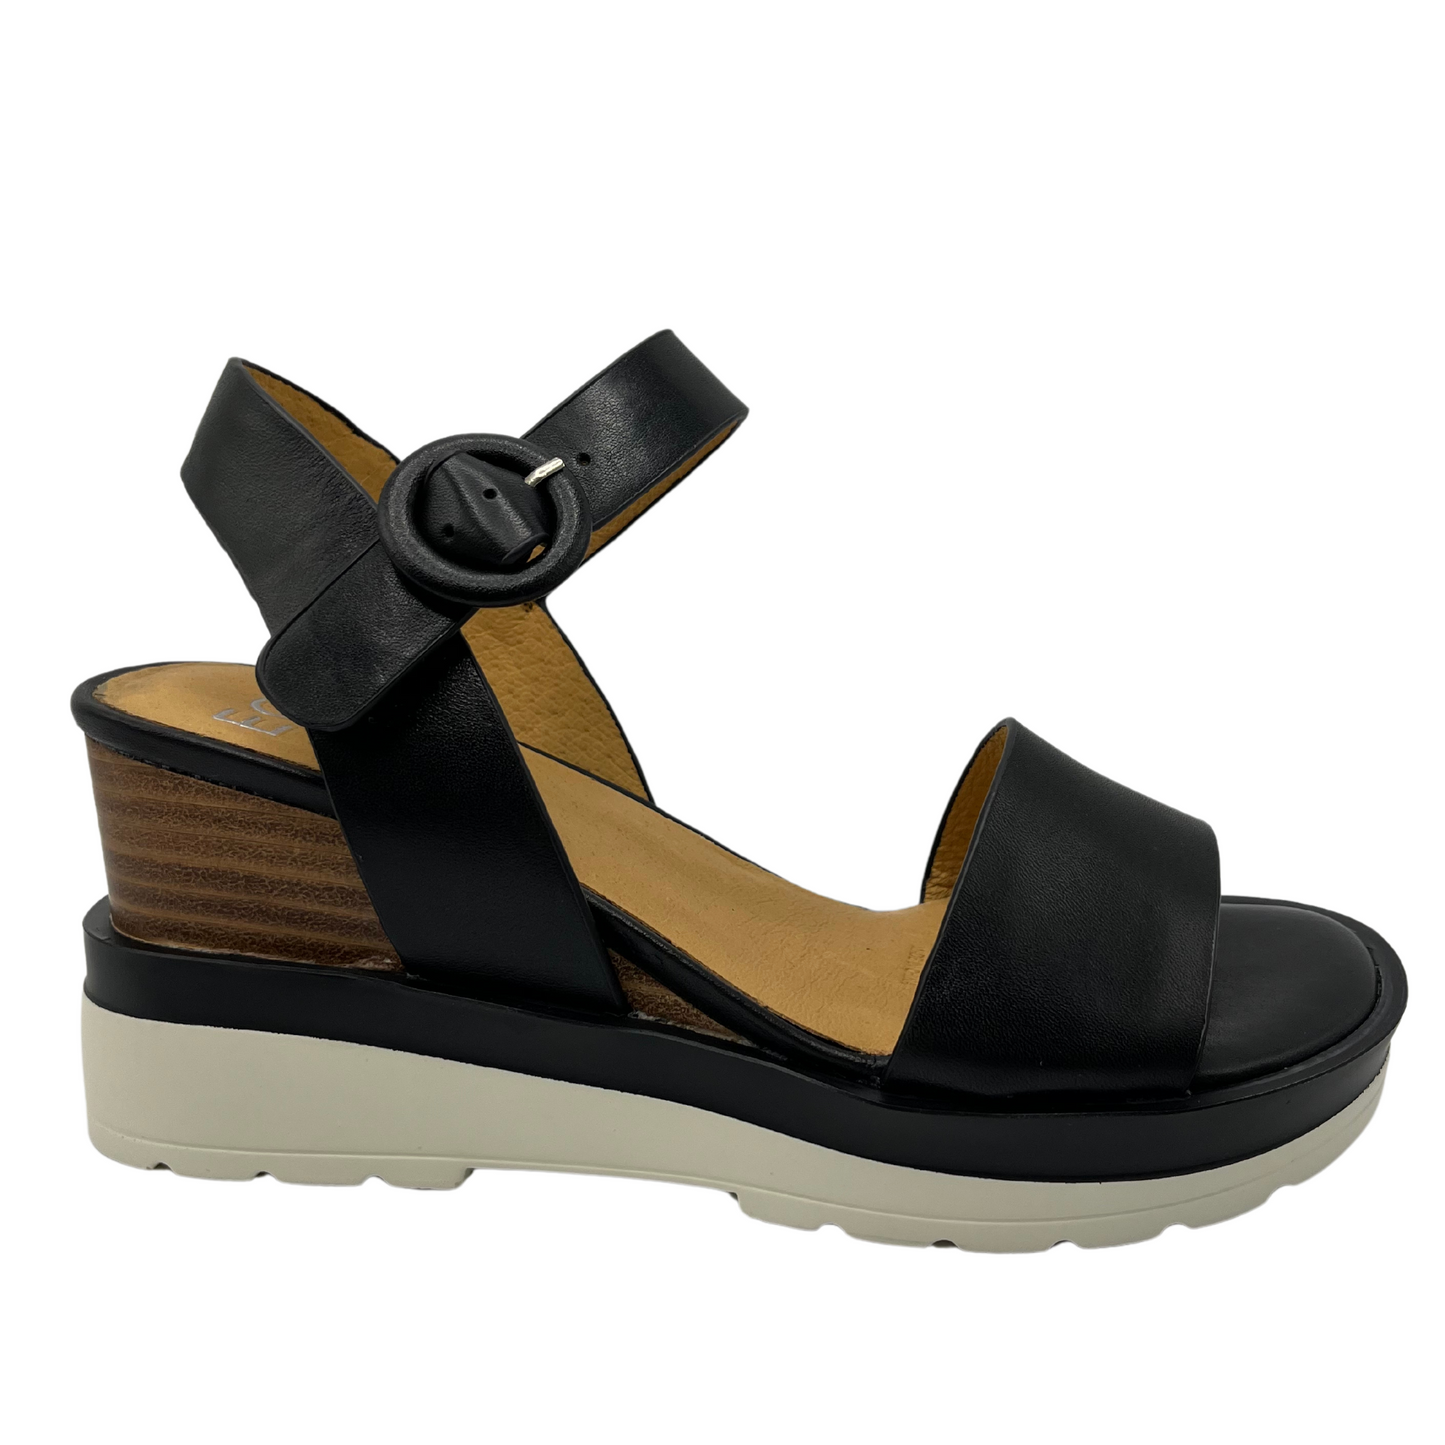 Right facing view of black leather sandal with stacked wedge heel